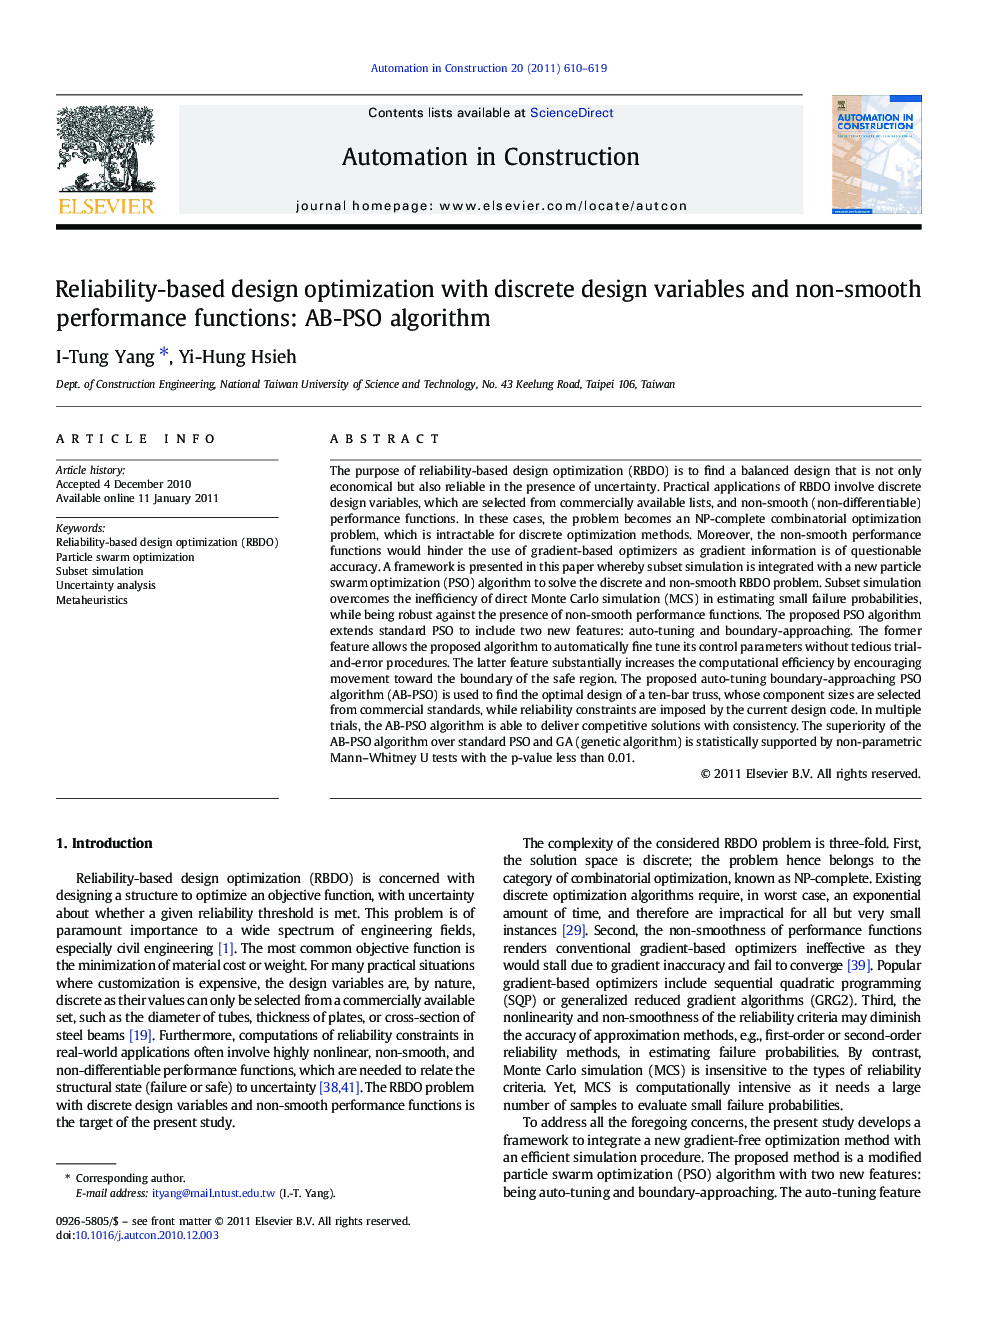 Reliability-based design optimization with discrete design variables and non-smooth performance functions: AB-PSO algorithm